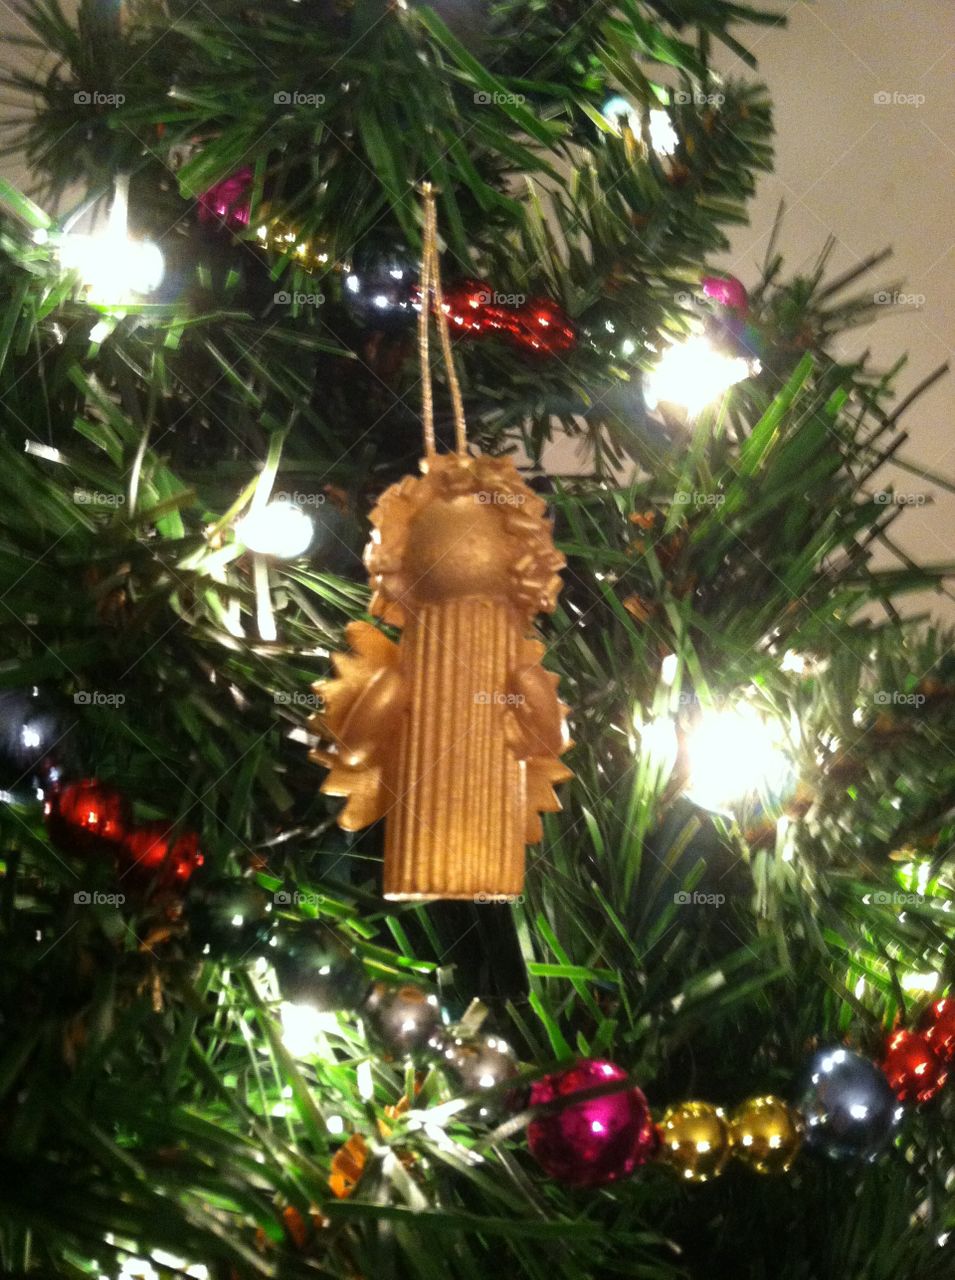 Noodle Angel Ornament. A gift from a child many years ago- a noodle angel Christmas ornament always gets a prominent place on the  tree
